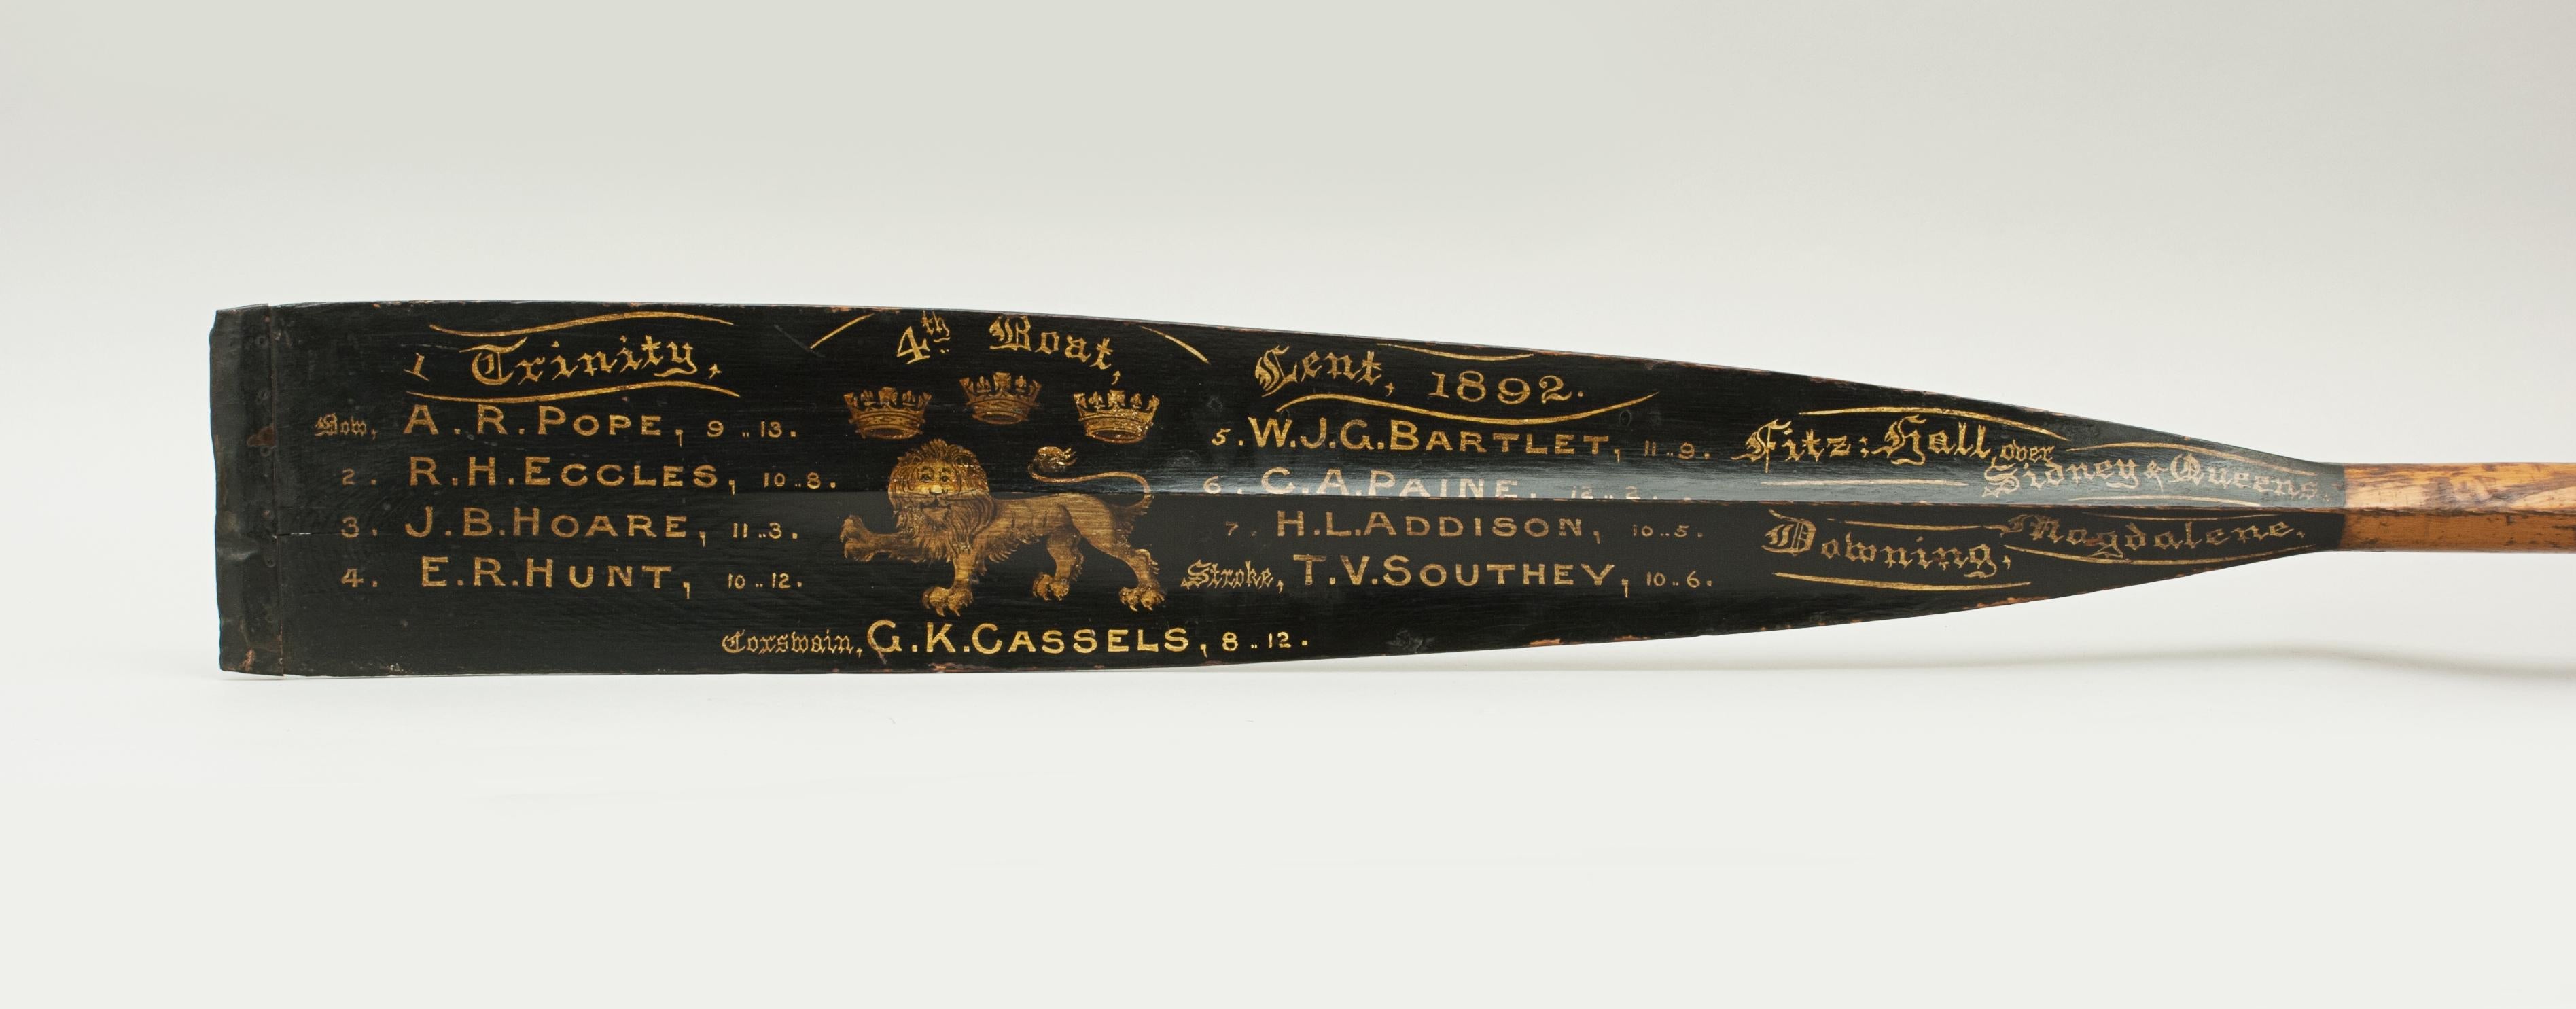 Cambridge presentation oar, trophy blade, 1892.
The 12 ft oar is an original traditional Trinity College (Cambridge University) presentation rowing oar with calligraphy and The 1st Trinity Boat Club insignia. The paint and writing on the trophy